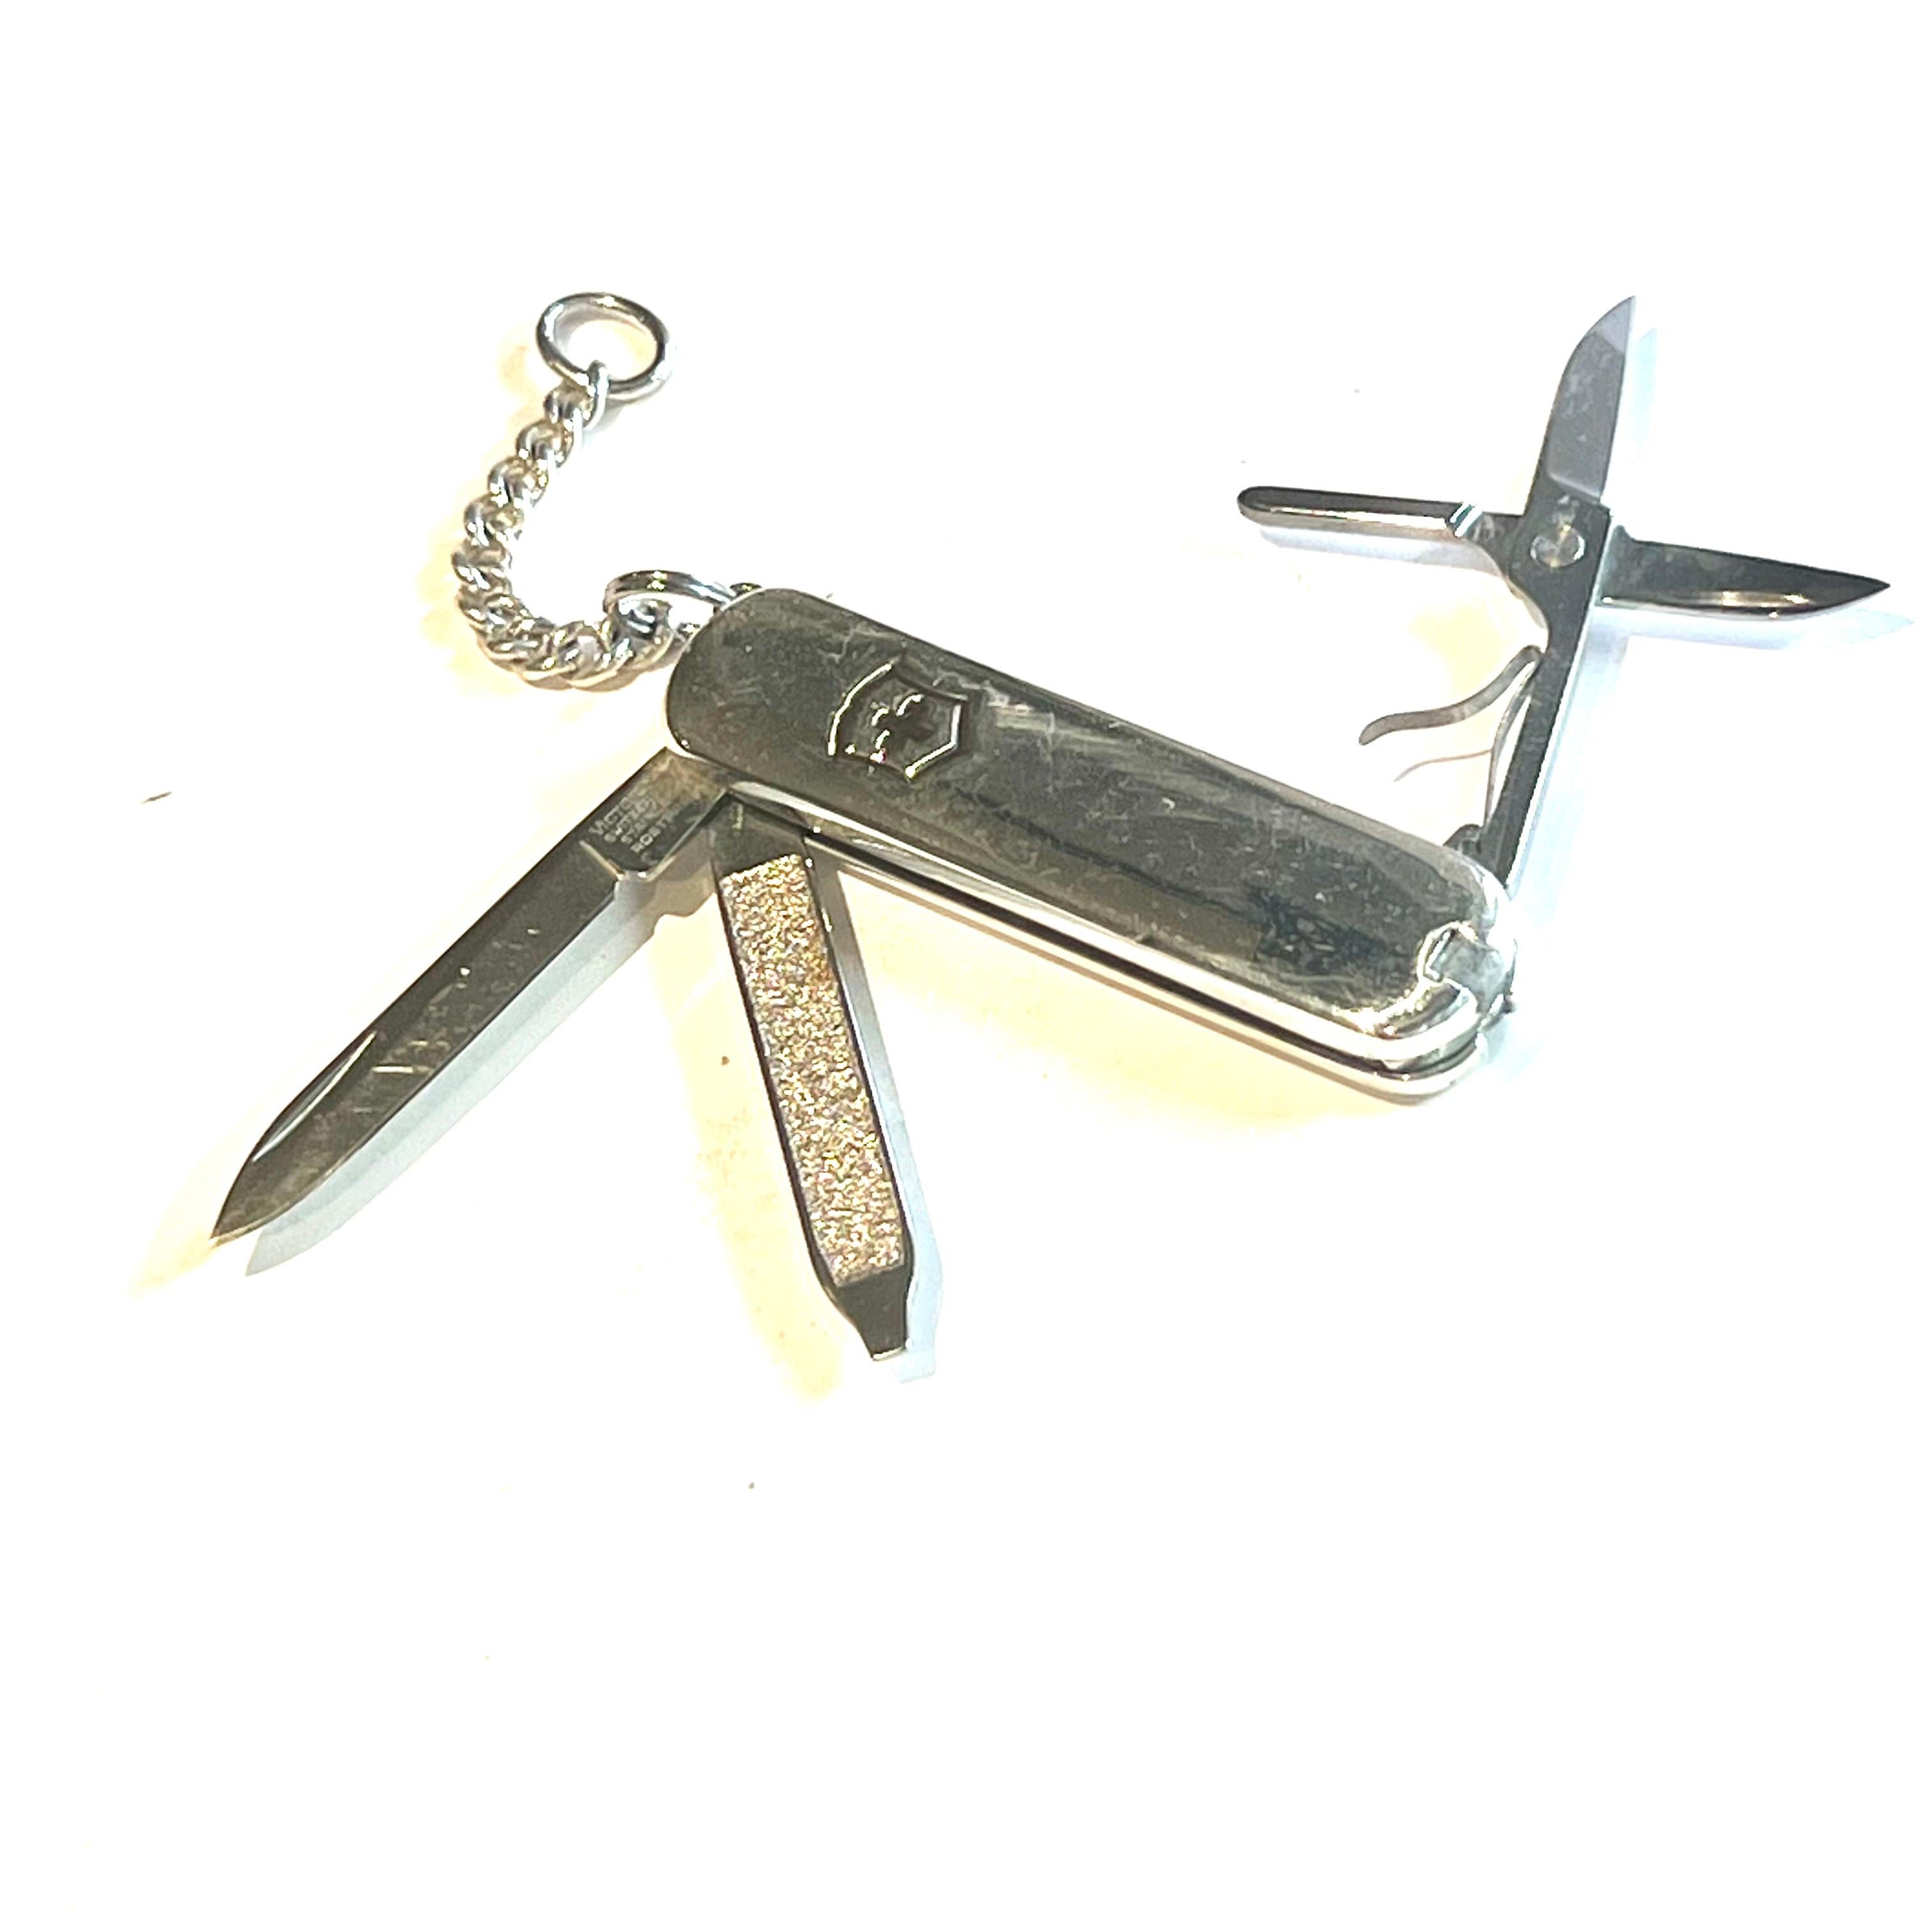 Authentic Tiffany & Co Estate Pocket Knife with Key chain 18k Silver TIF599

This elegant Authentic Tiffany & Co pocket knife is made of sterling silver & 18k yellow gold.


TRUSTED SELLER SINCE 2002

PLEASE SEE OUR HUNDREDS OF POSITIVE FEEDBACKS